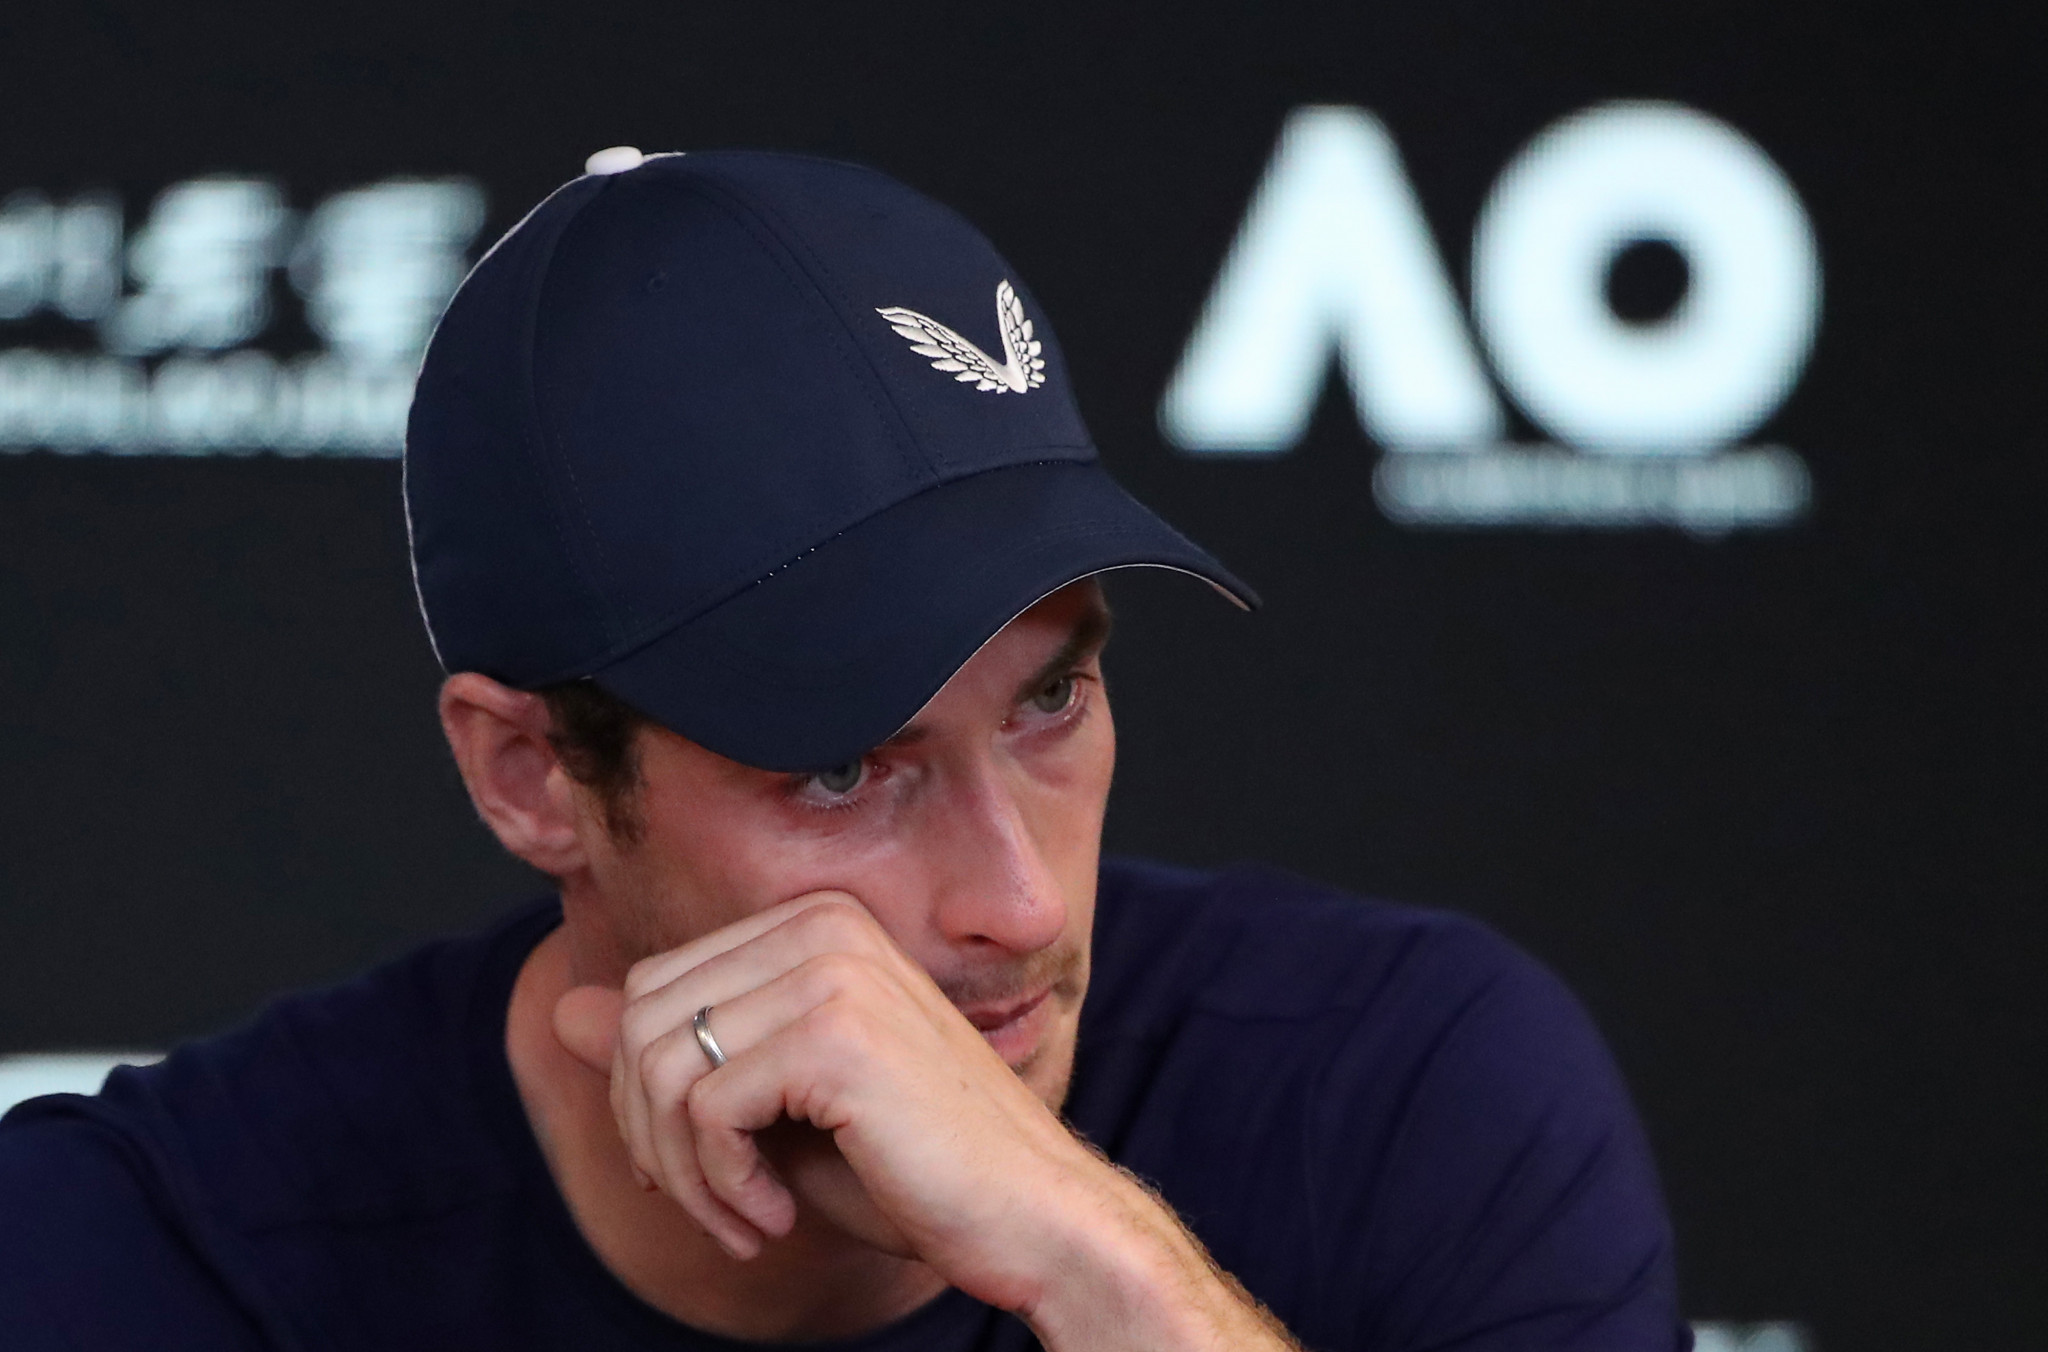 Andy Murray has announced he aims to retire from tennis at Wimbledon ©Getty Images